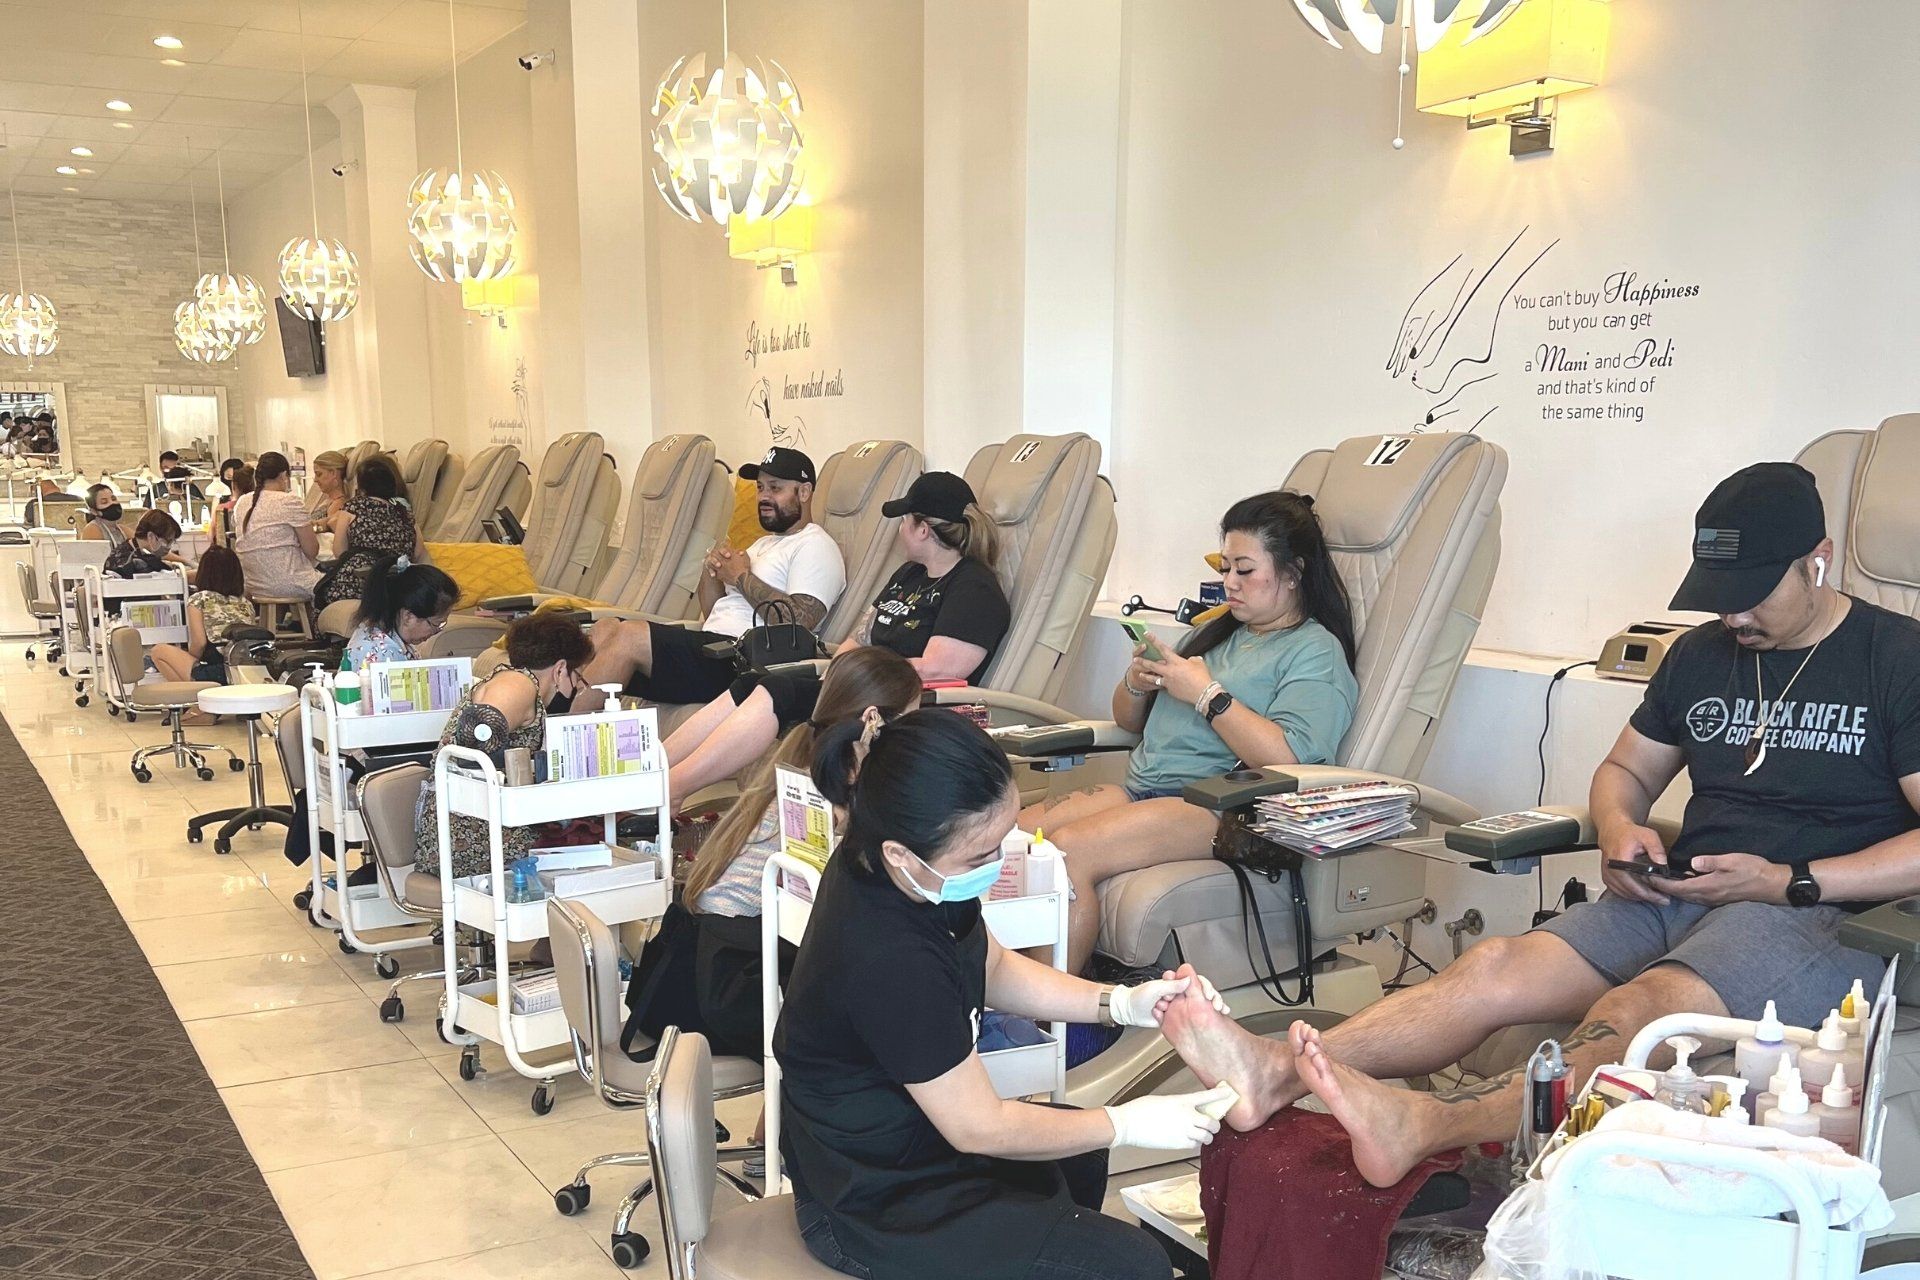 Best nail salon in San Jose for pedicure. We offer services for both for men and women